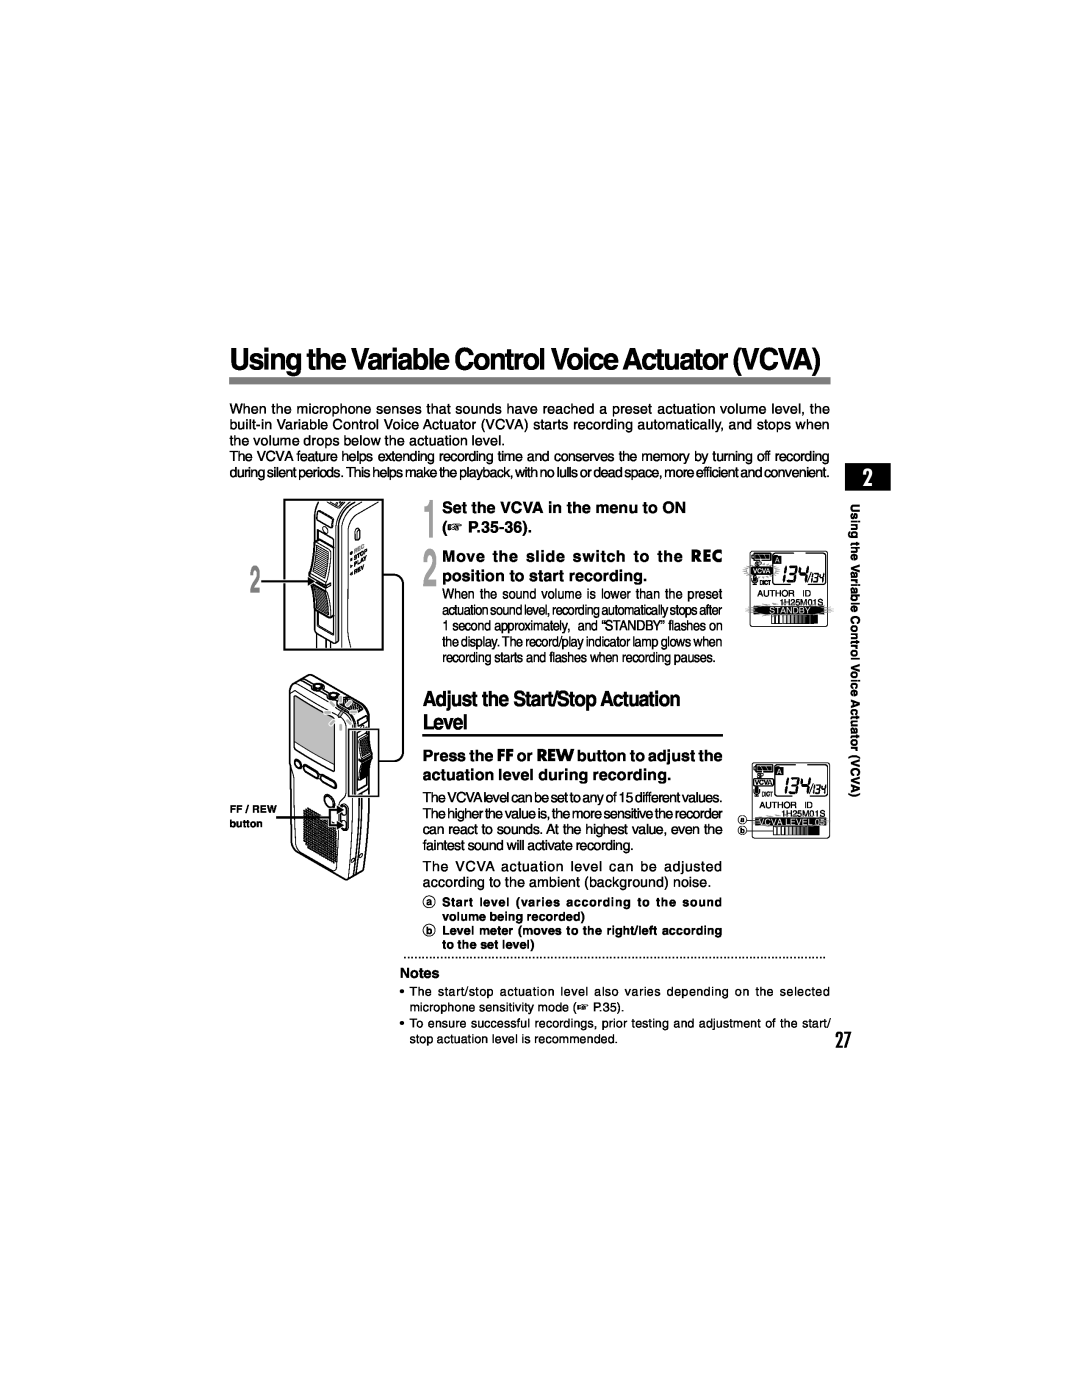 Olympus DS-4000 manual Using the Variable Control Voice Actuator VCVA, Adjust the Start/Stop Actuation Level 